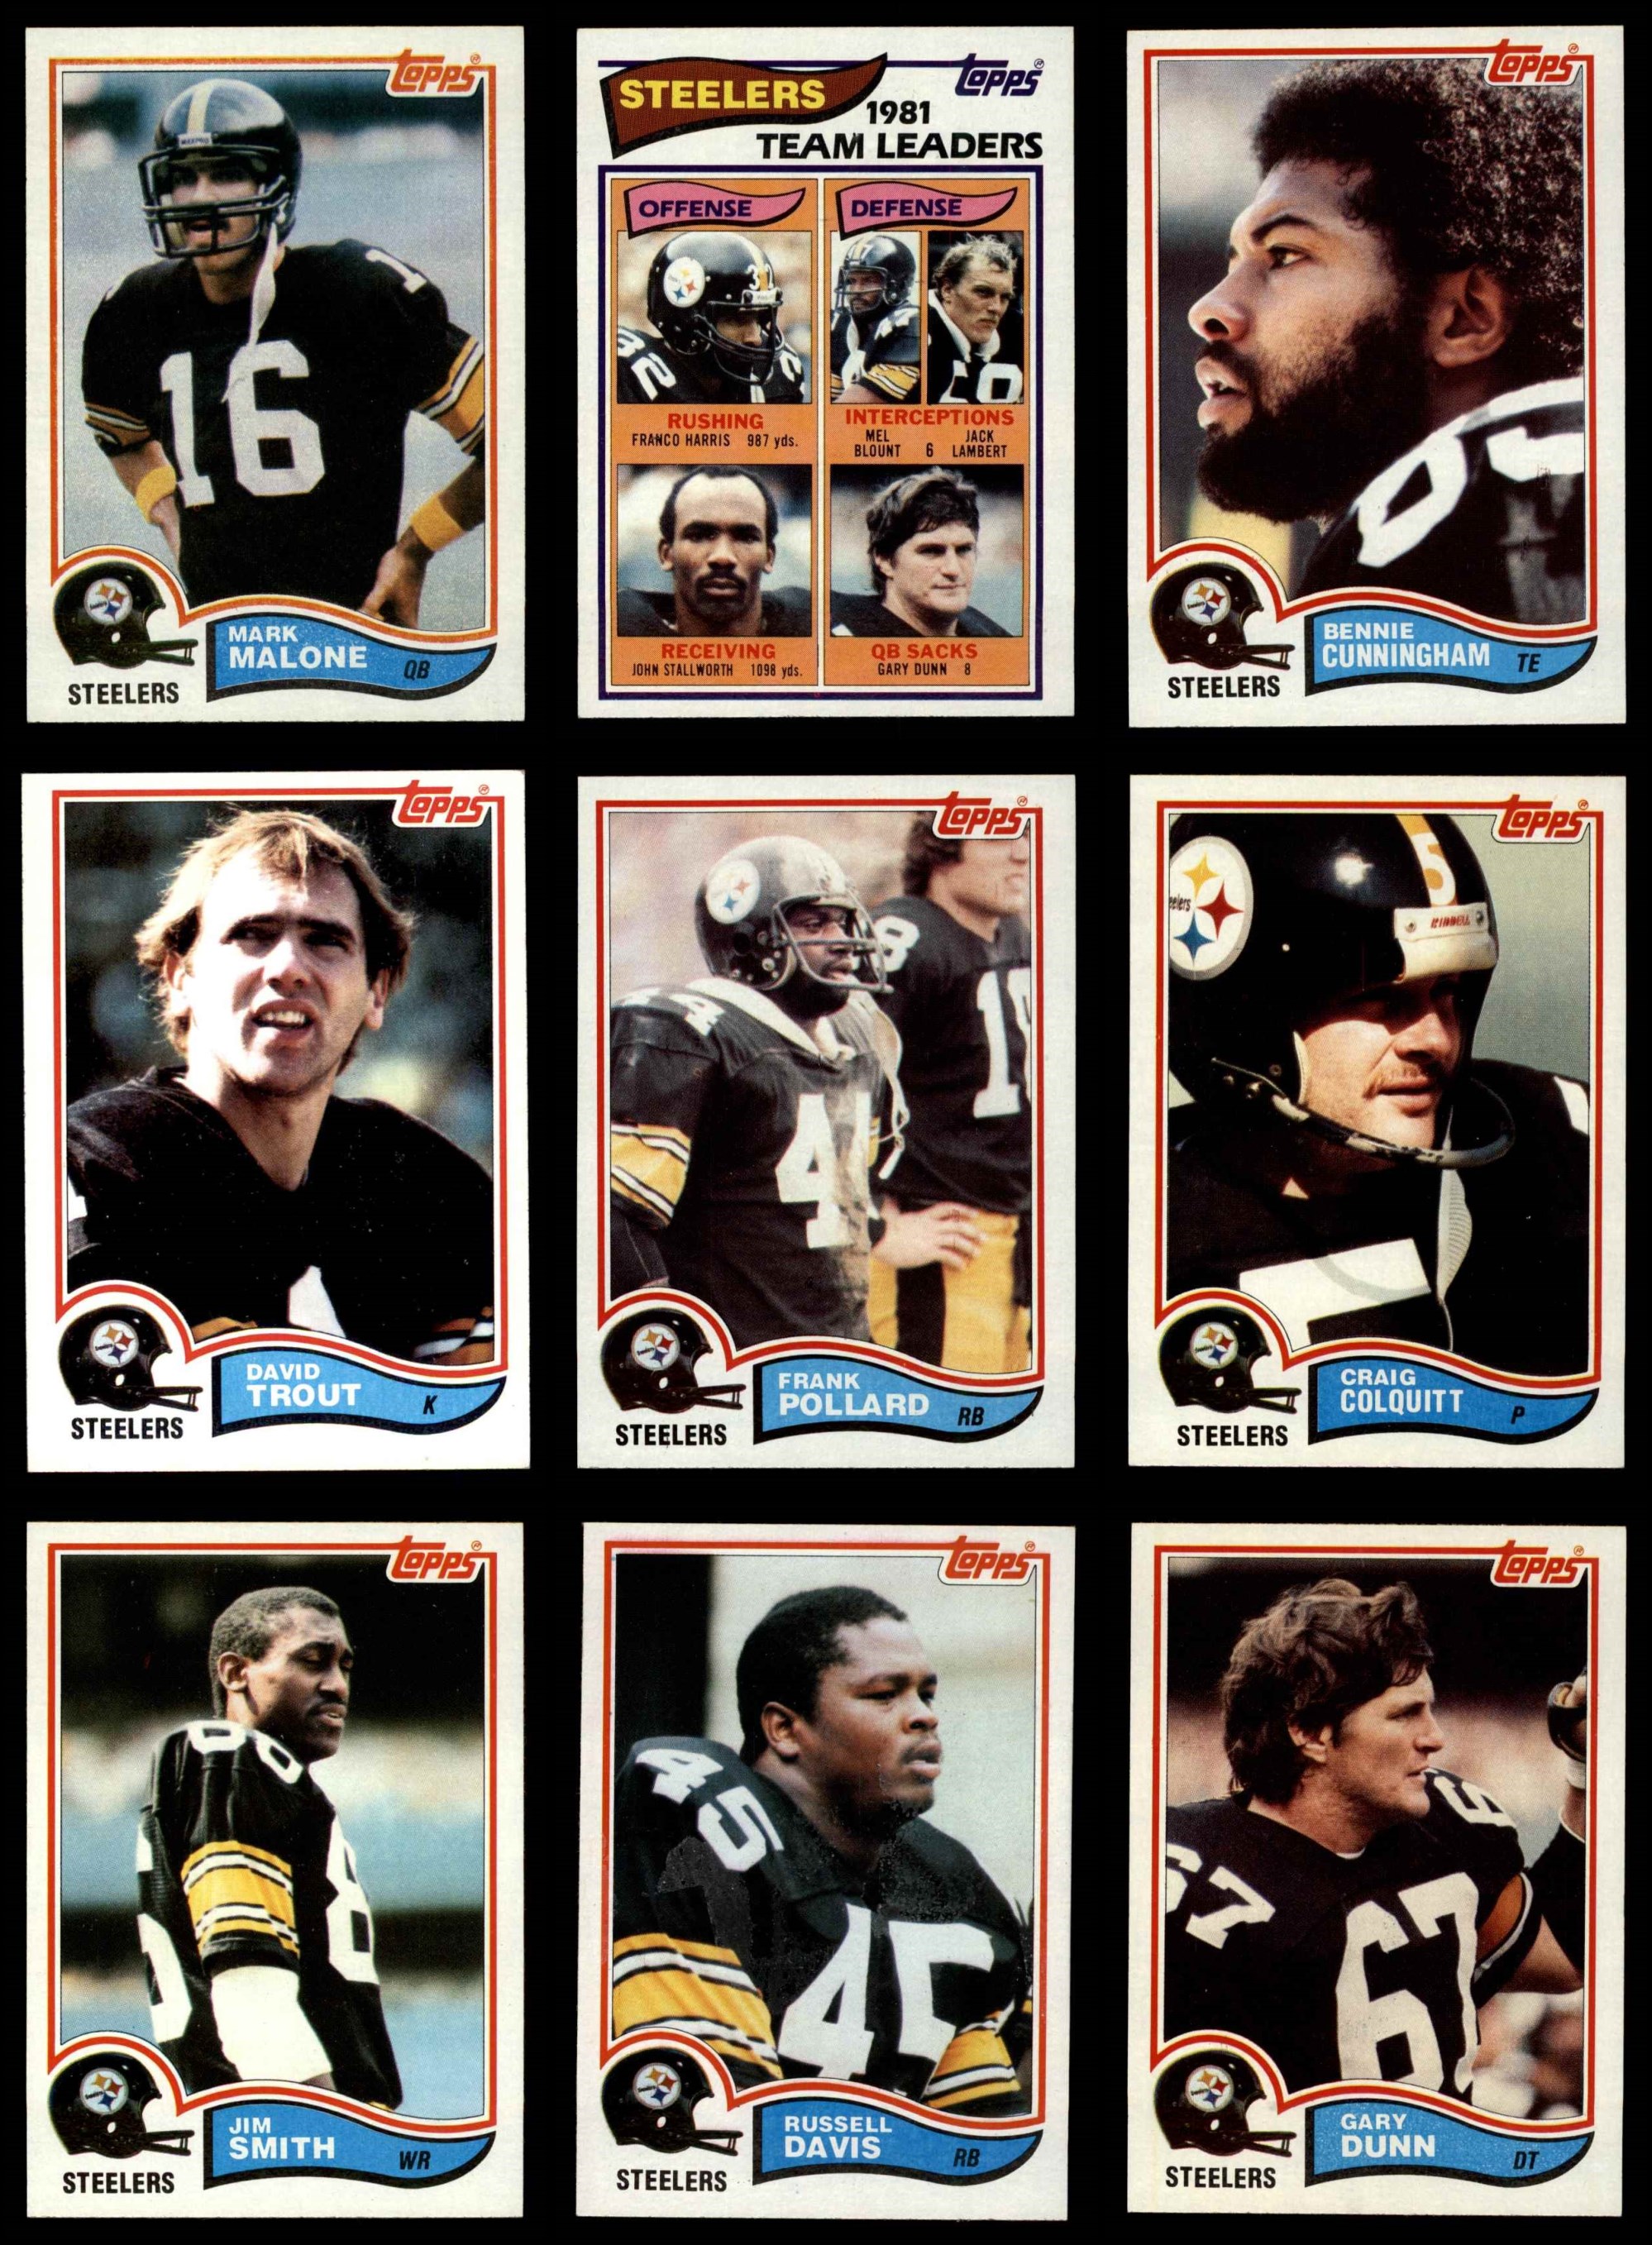 1976 Topps Pittsburgh Steelers Team Set EX for sale online | eBay